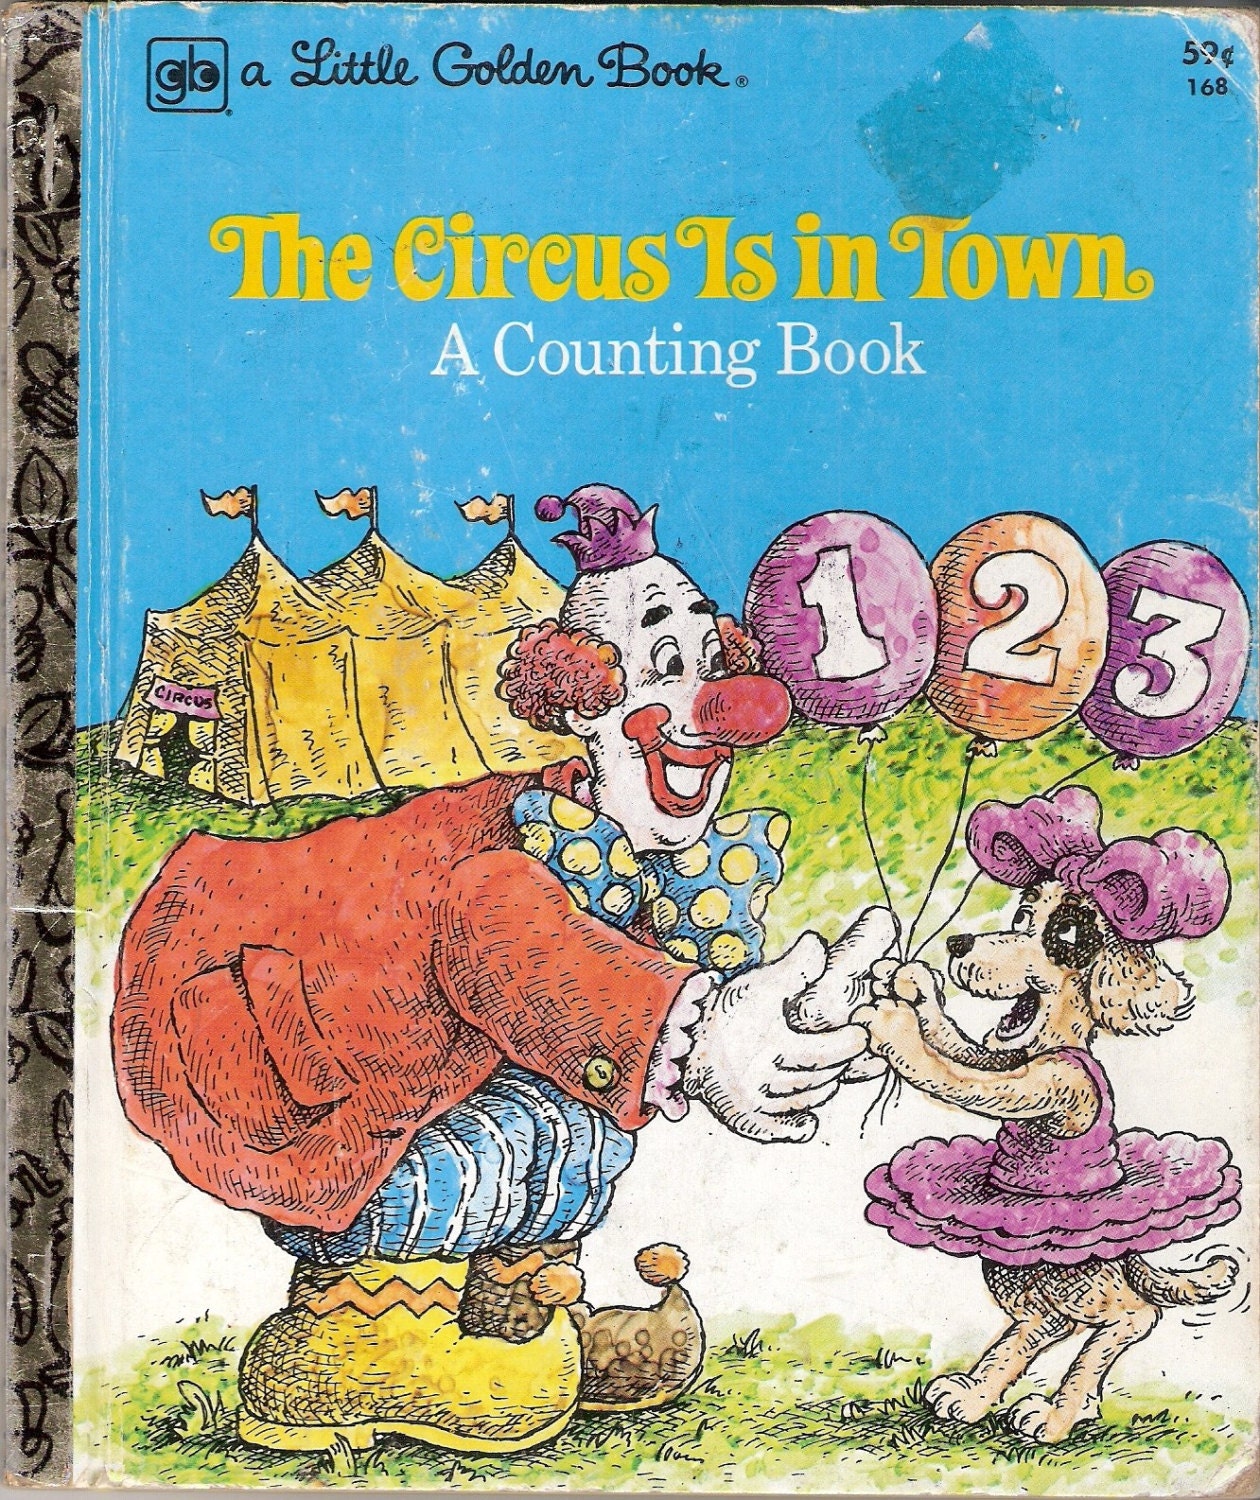 When The Circus Came To Town by Deborah McClatchey